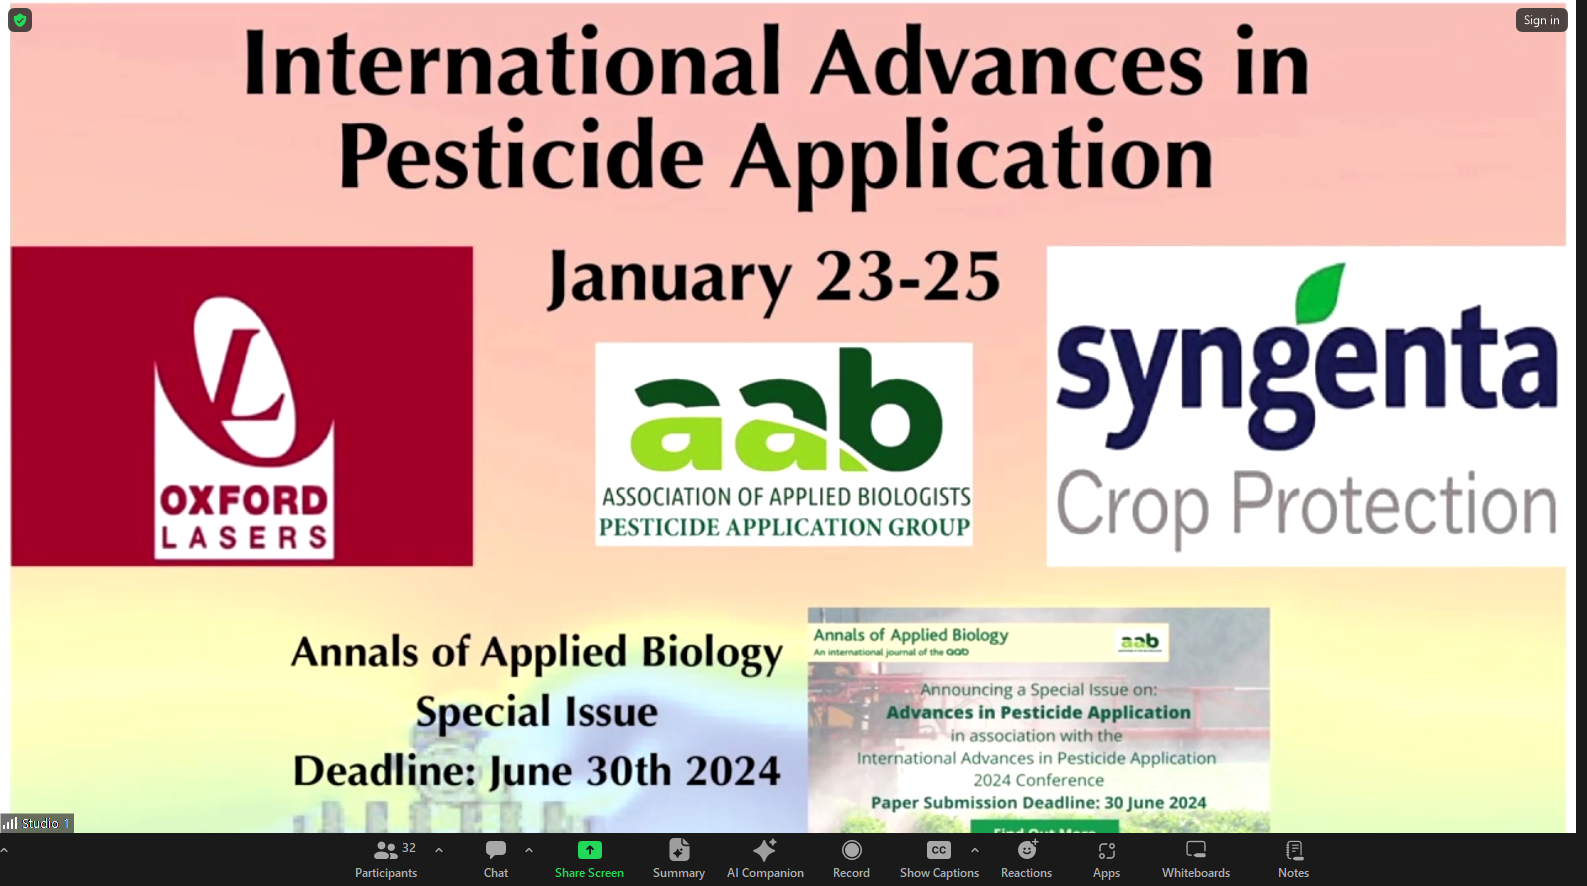 AAB Advances in Pesticide Application 2024 Conference Image